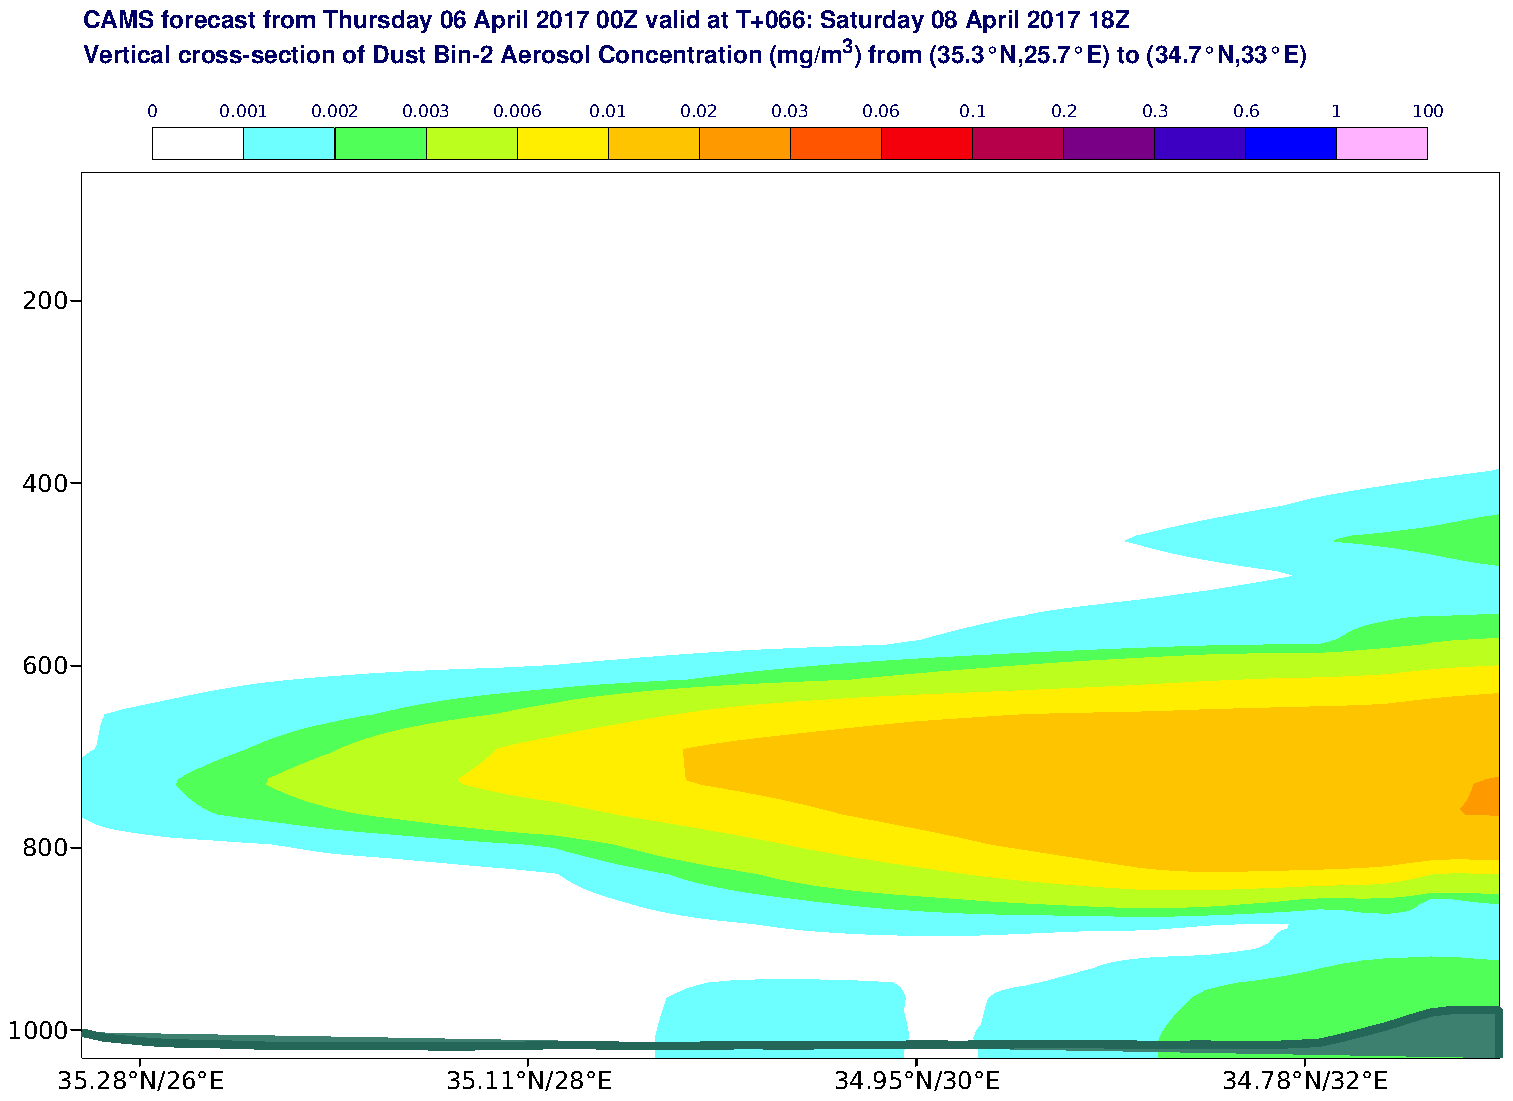 Vertical cross-section of Dust Bin-2 Aerosol Concentration (mg/m3) valid at T66 - 2017-04-08 18:00